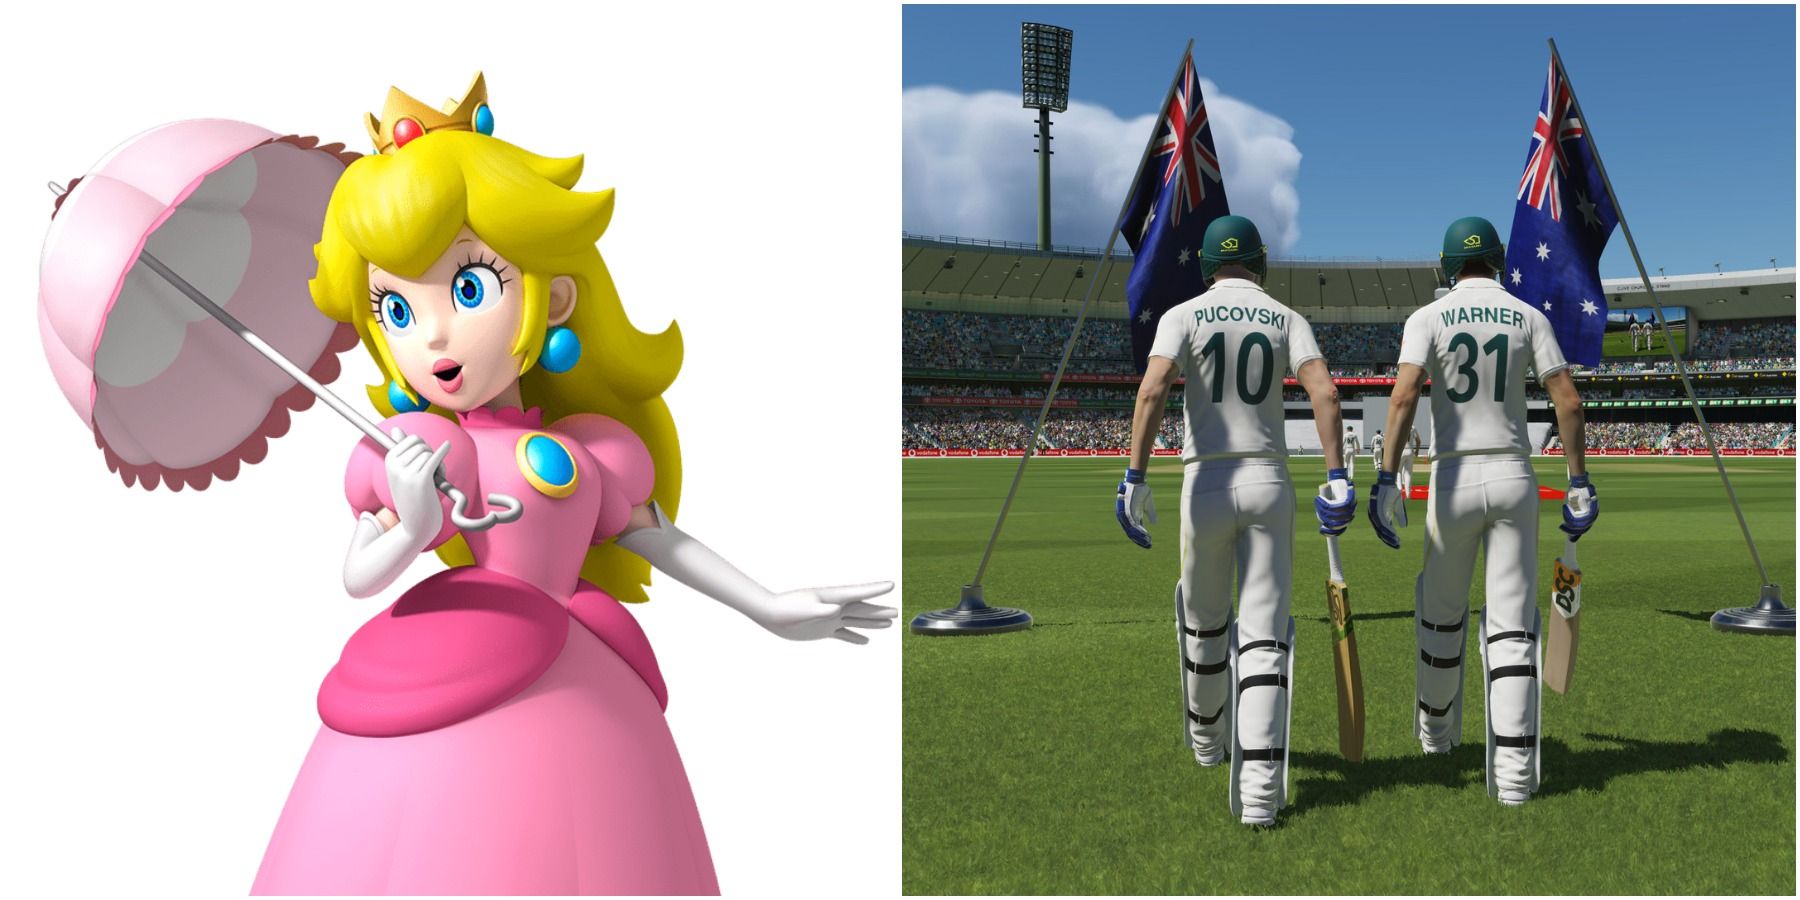 (Left) Princess Peach (Right) Batters walking onto the field